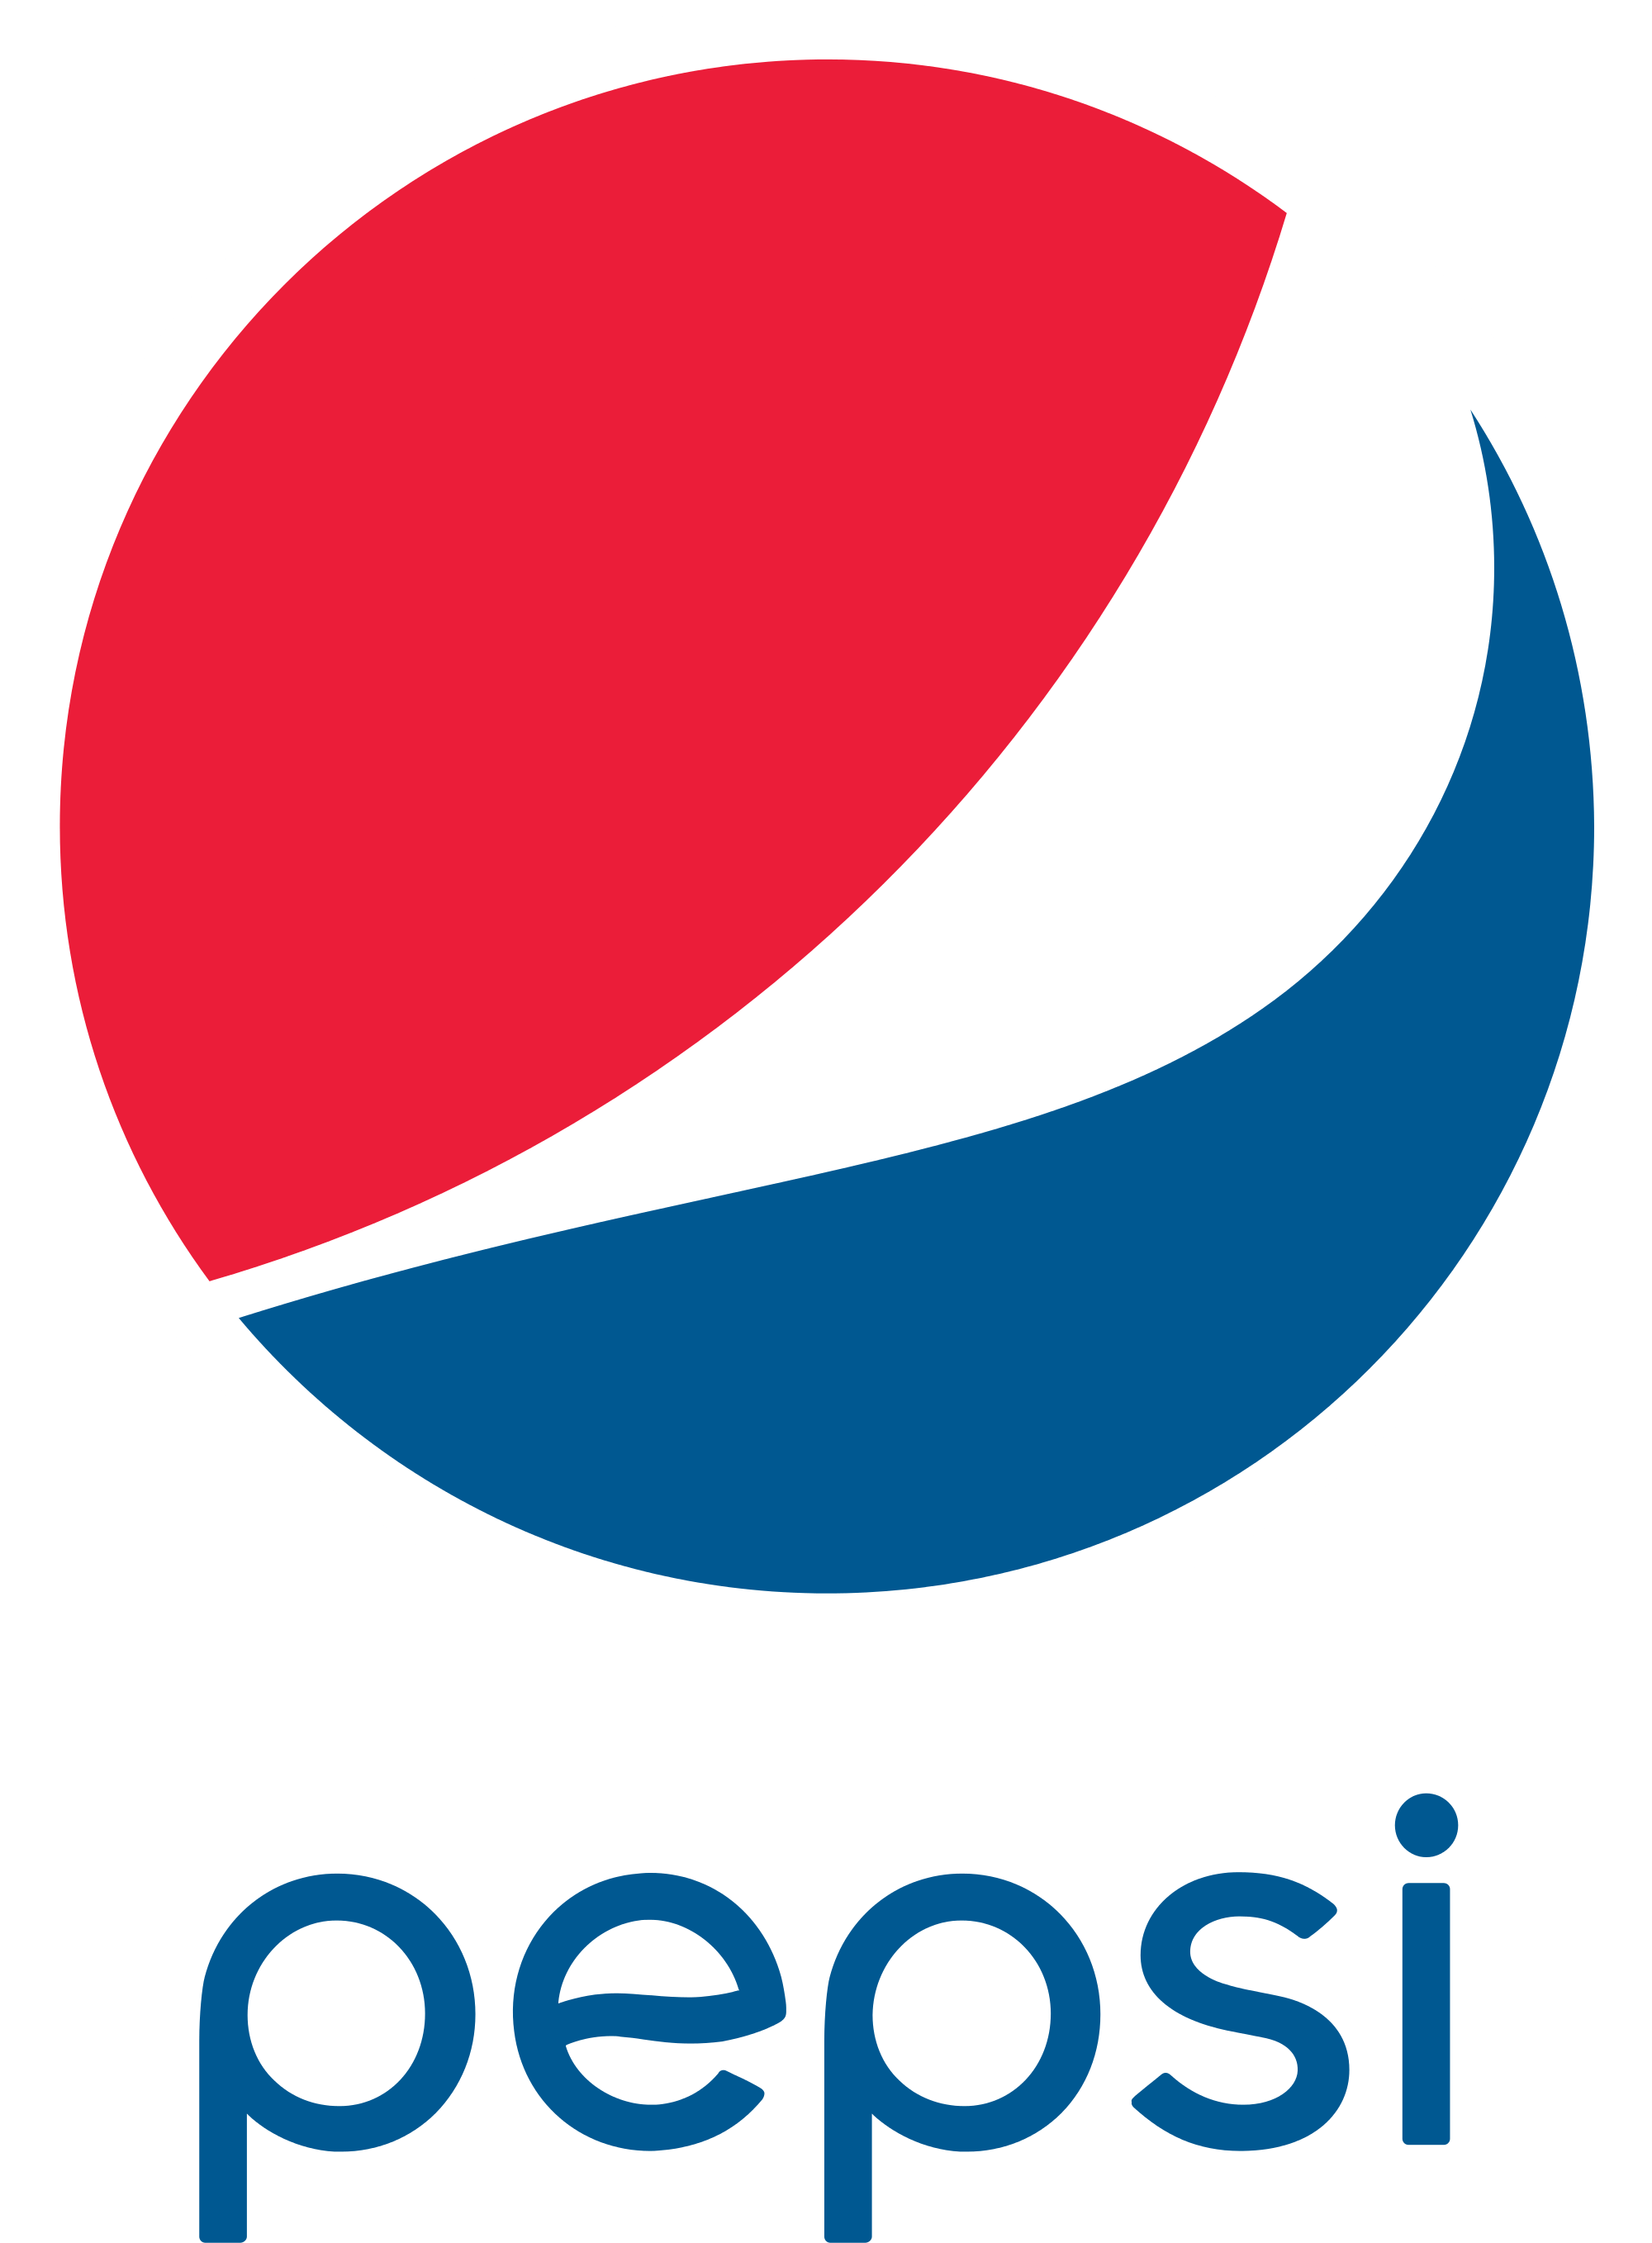 Pepsi is a god logo because it appeals to its American audience